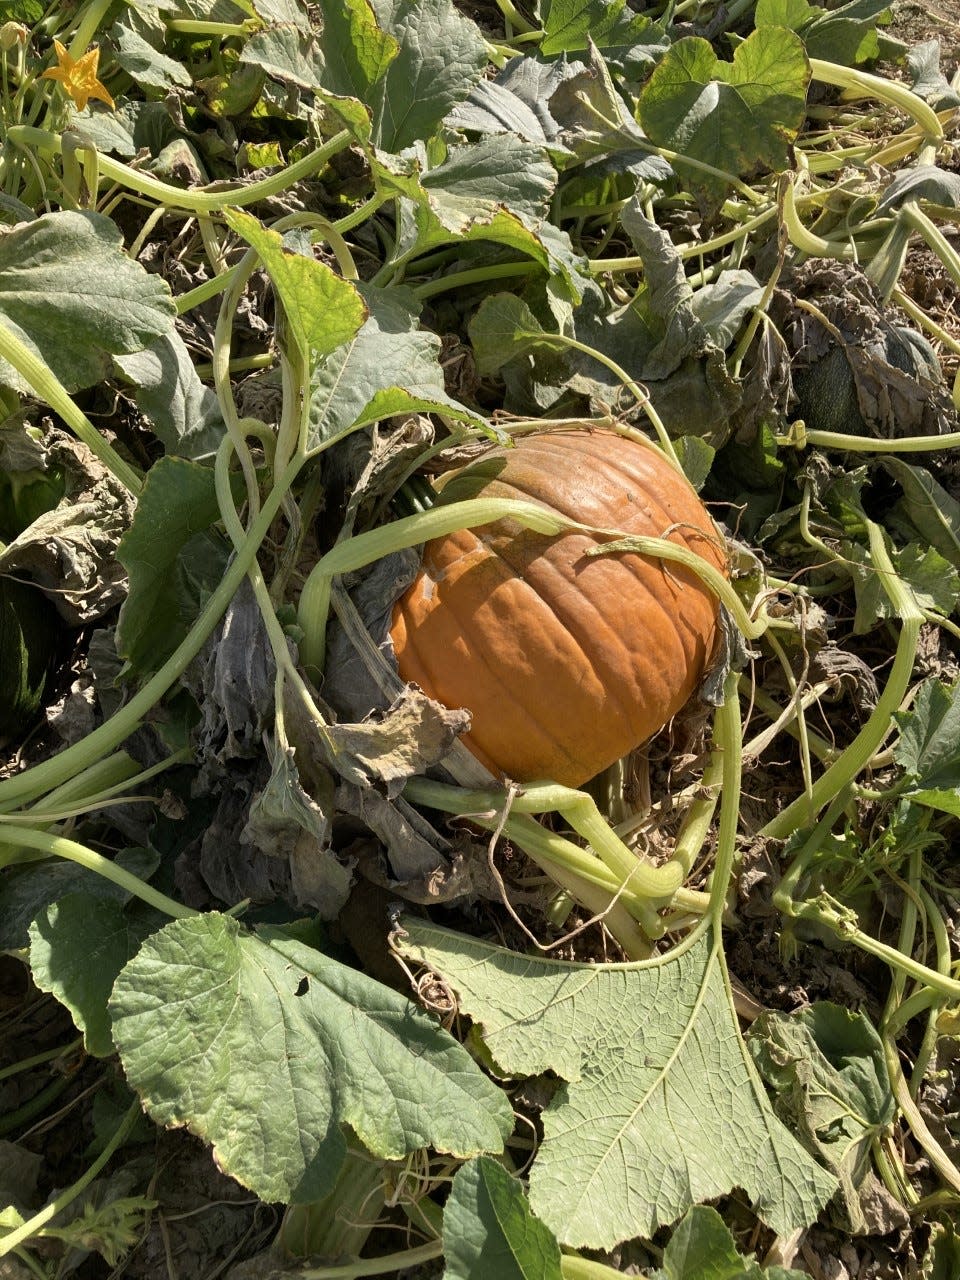 La Union Maze is taking reservations for people to pick a pumpkin in the U-Pick patch. Reservations are $20, which go toward the purchase of the pumpkin.